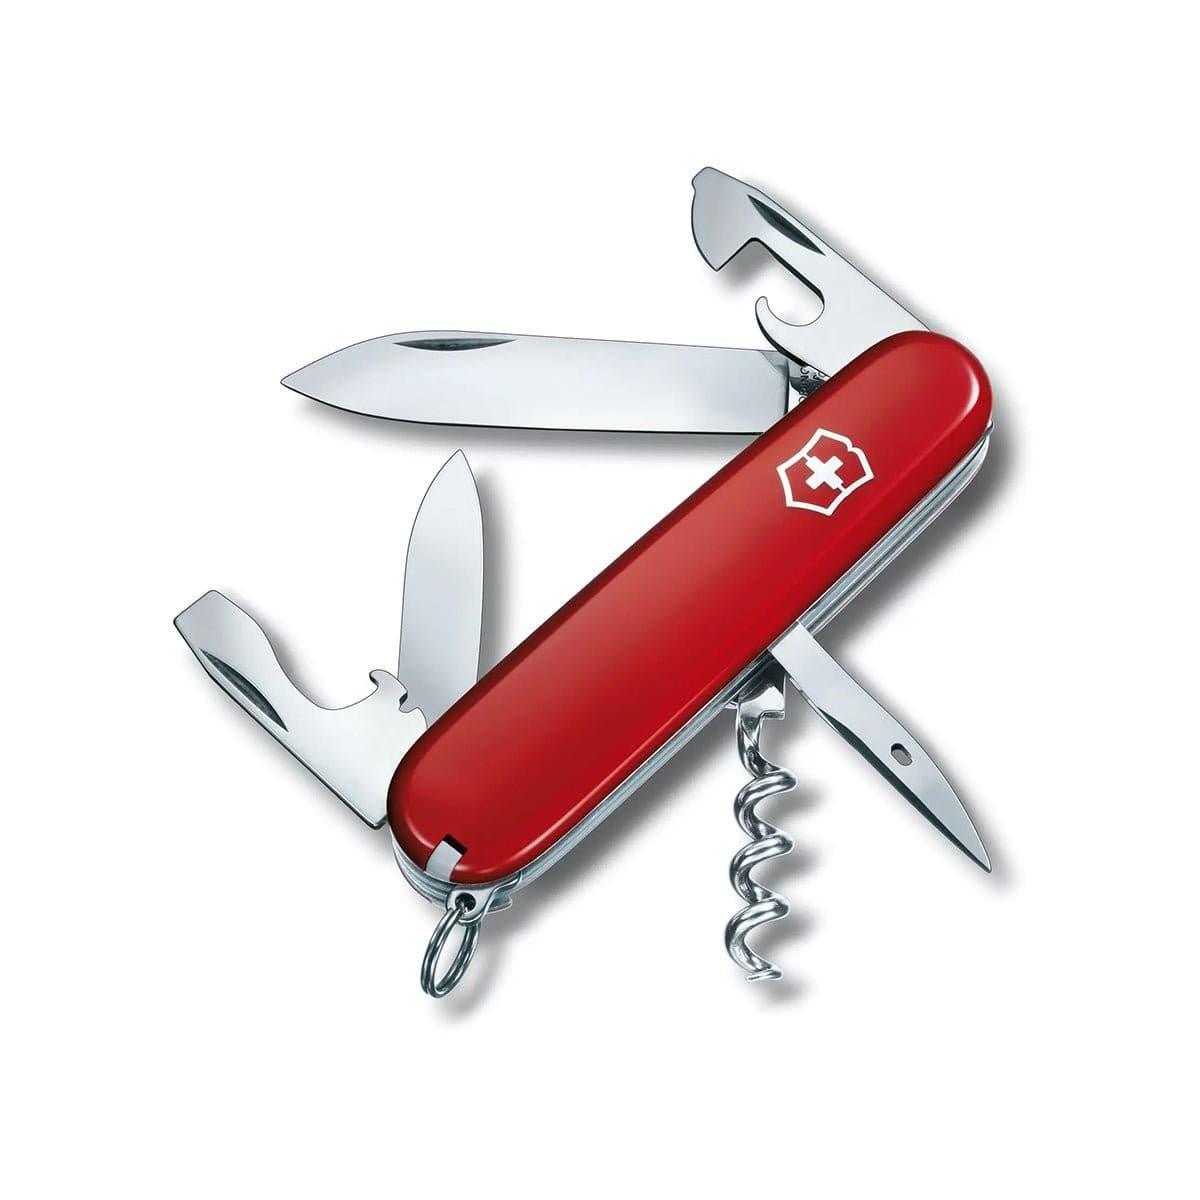 Victorinox Pocket Knife - Spartan Red - 12 Function Swiss Army Knife - Knife Store